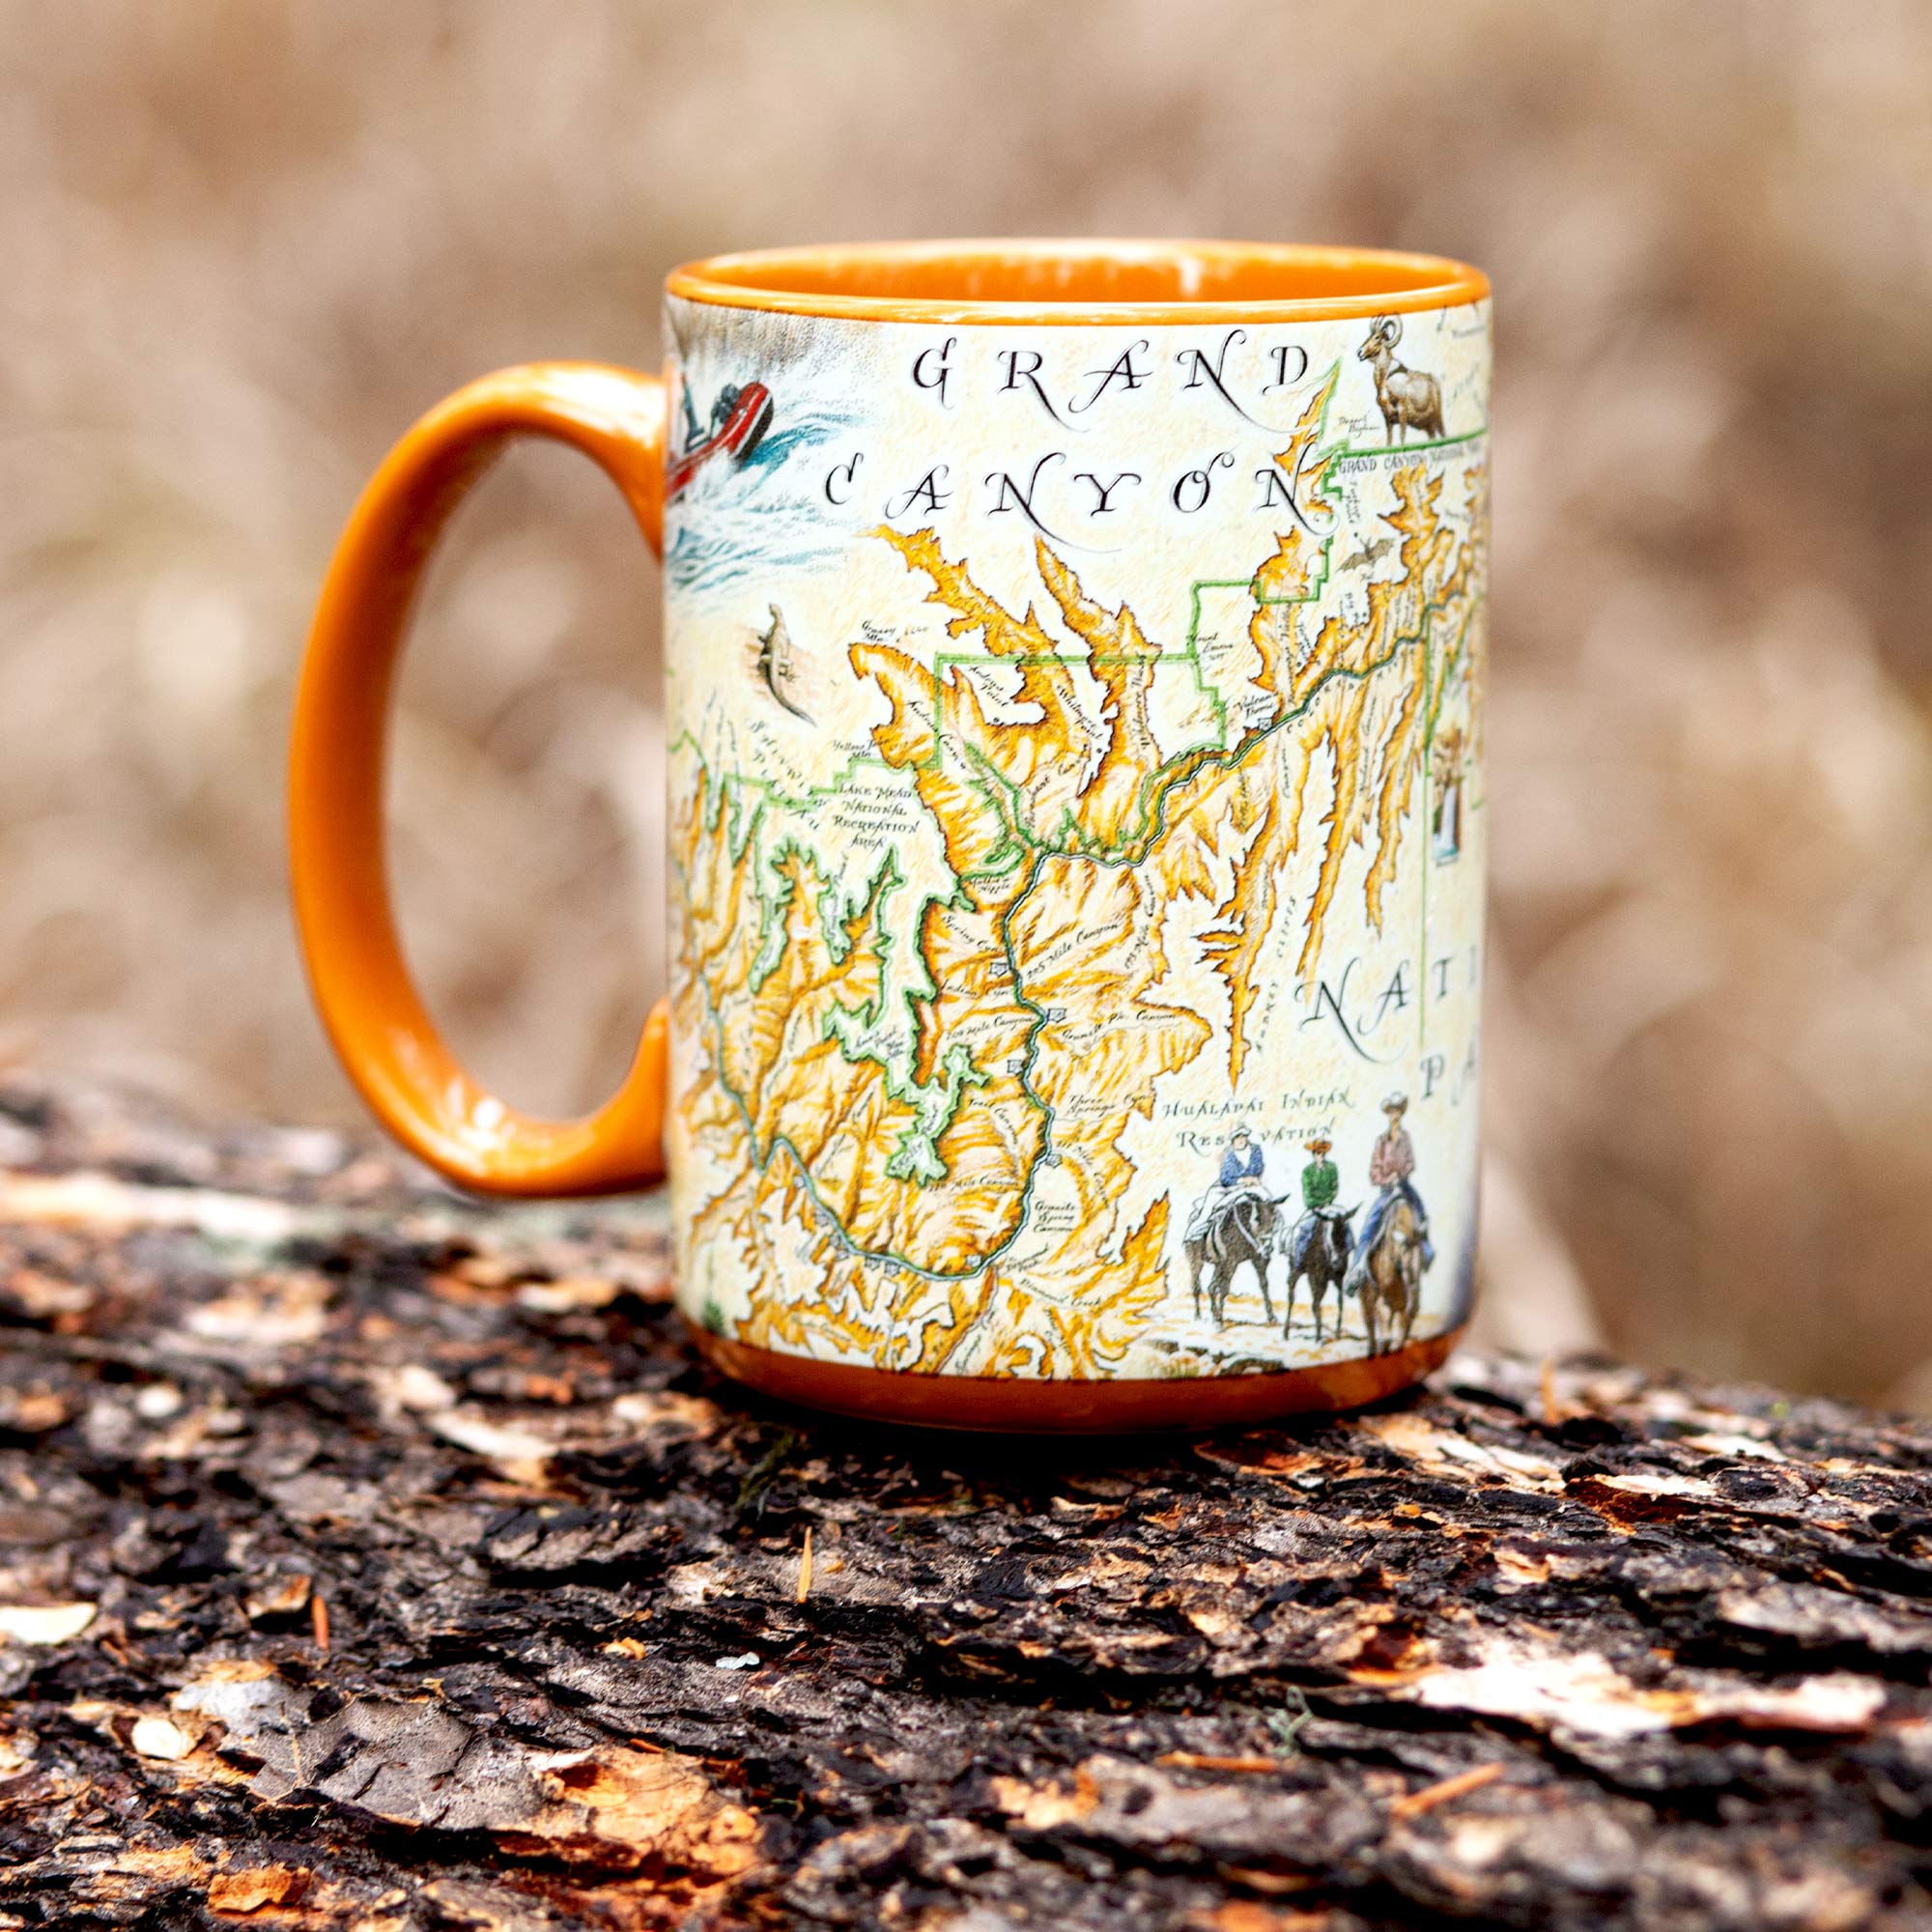 Grand Canyon National Park Map Coffee Mug sitting on a log in the forest. Burnt Orange - 16oz